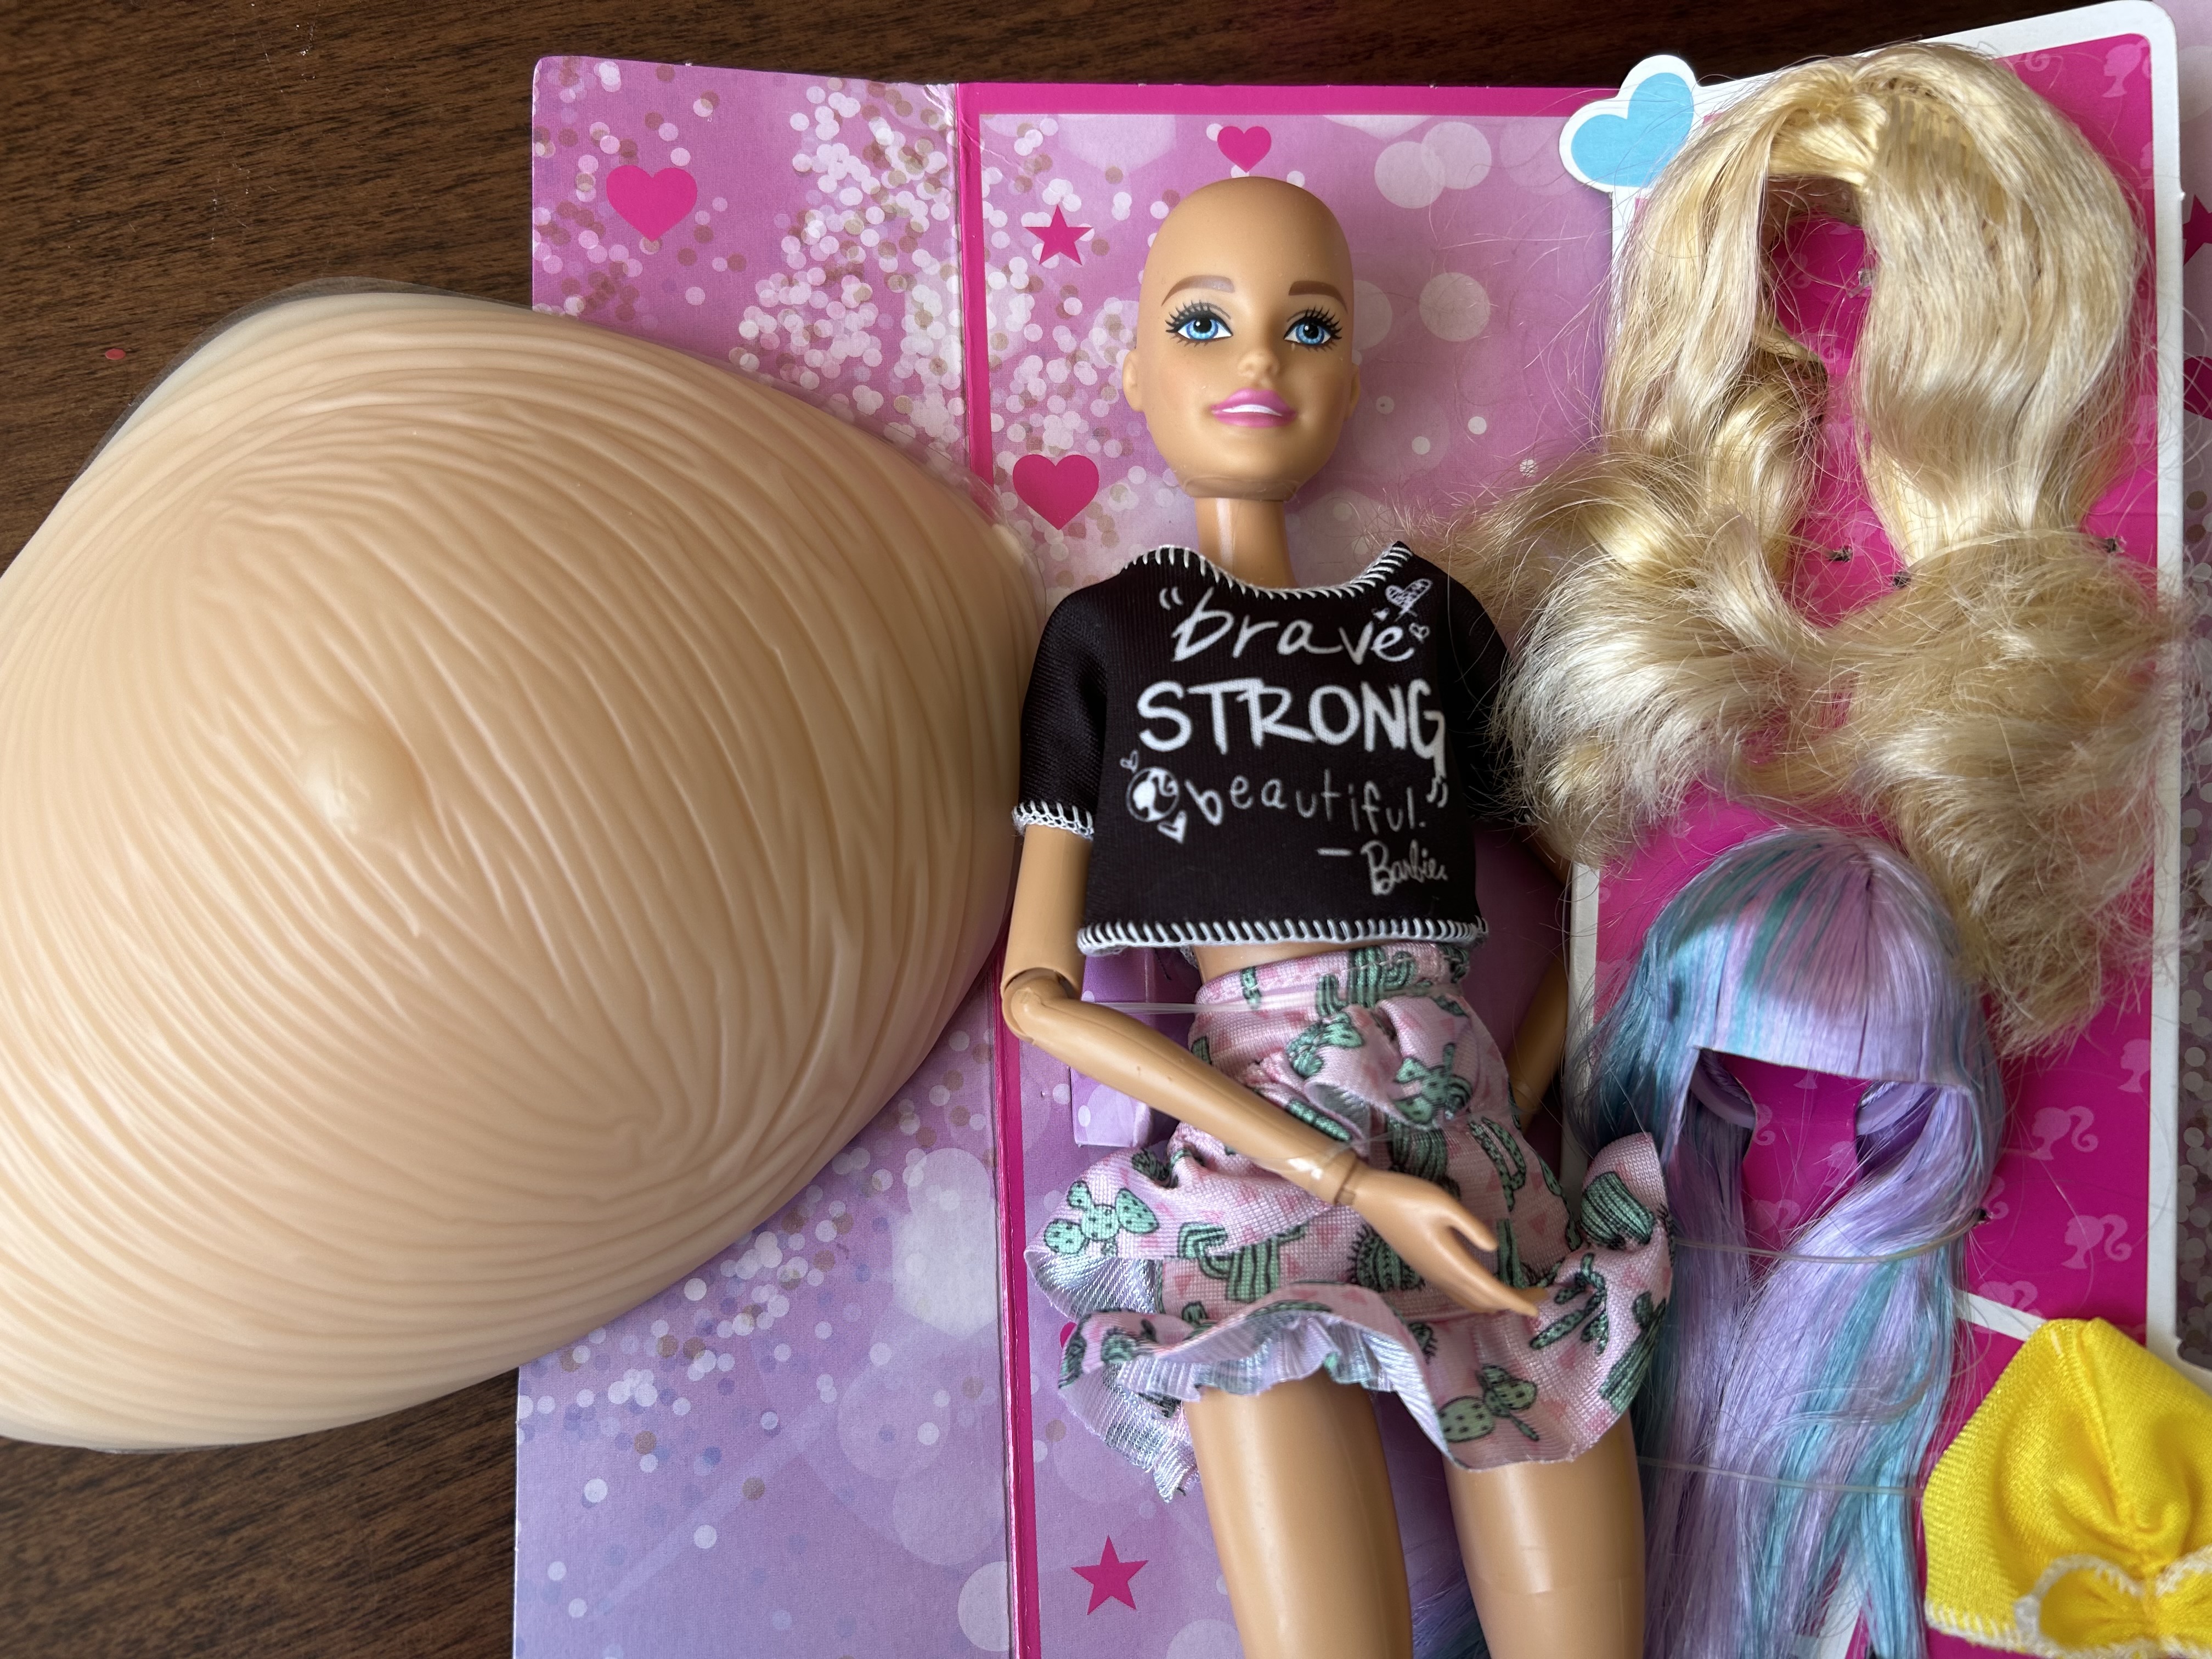 The Little Barbie that grew Breasts, growing up skipper